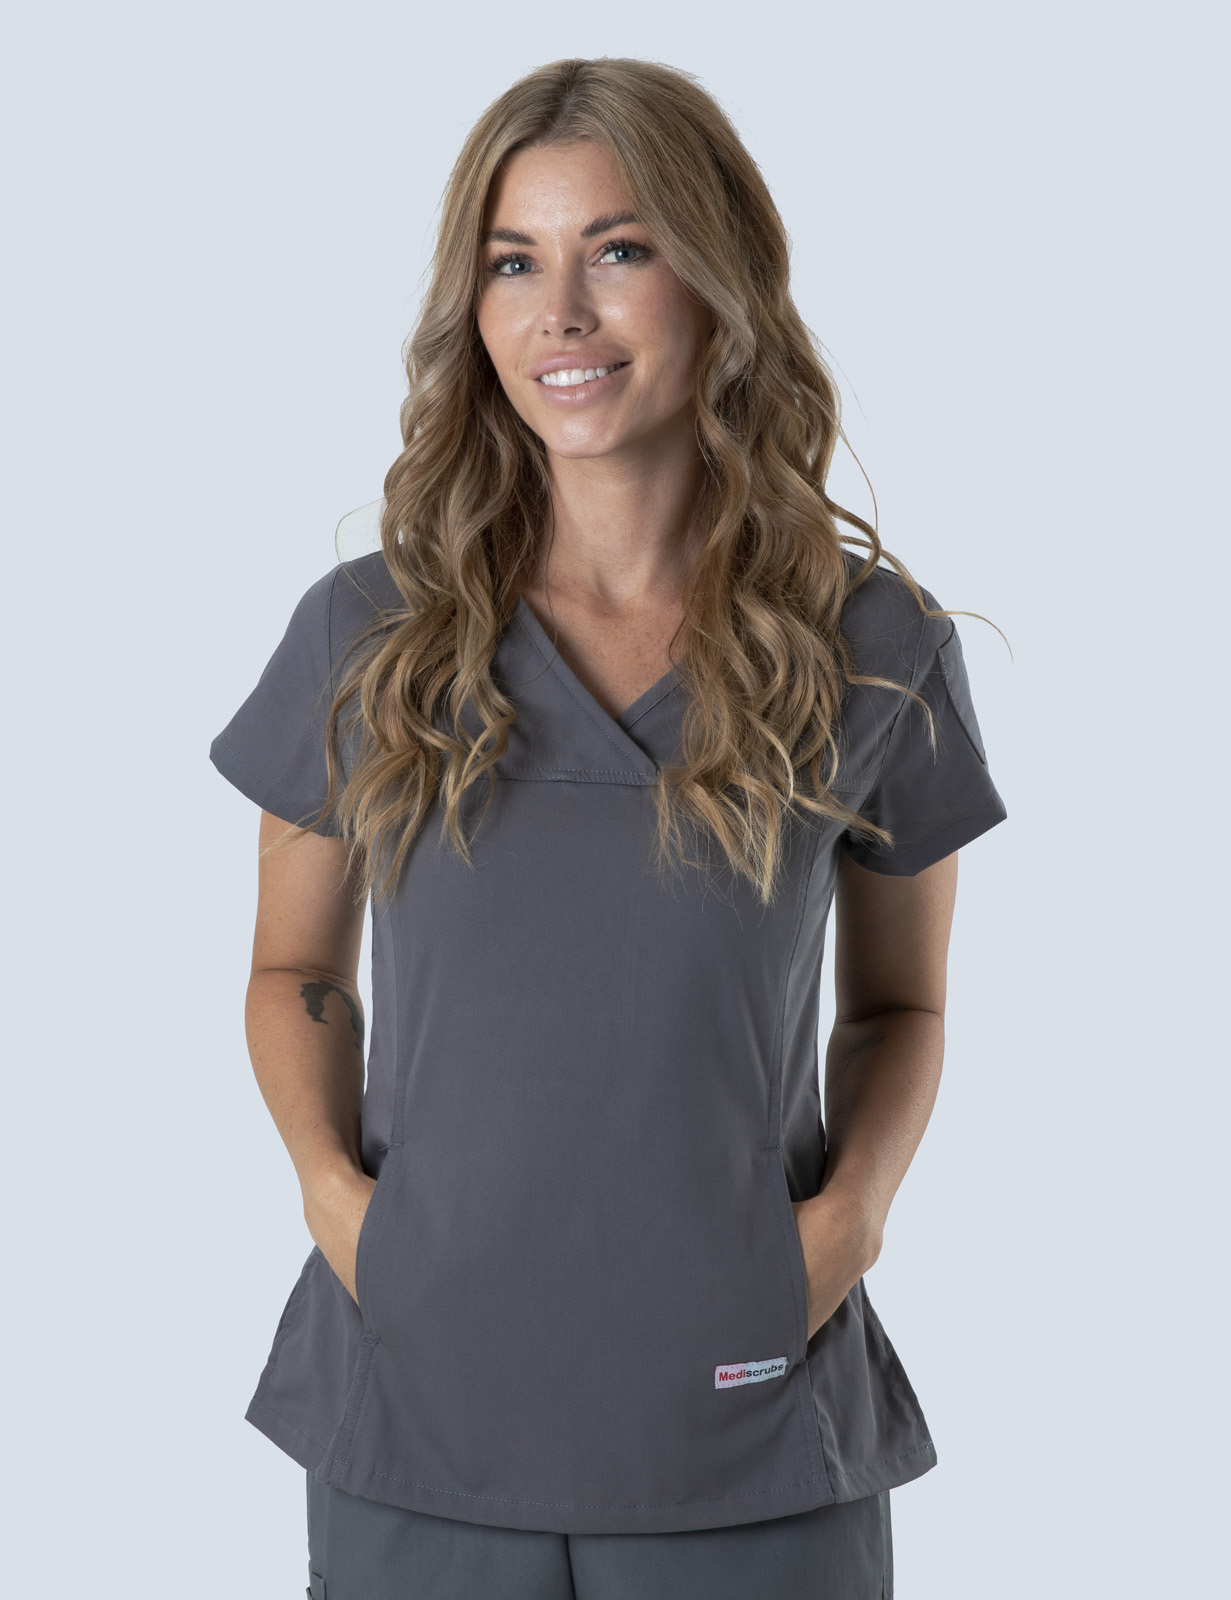 I-Med Radiology - Radiographer (Women's Fit Solid Scrub Top in Steel Grey incl Logos)